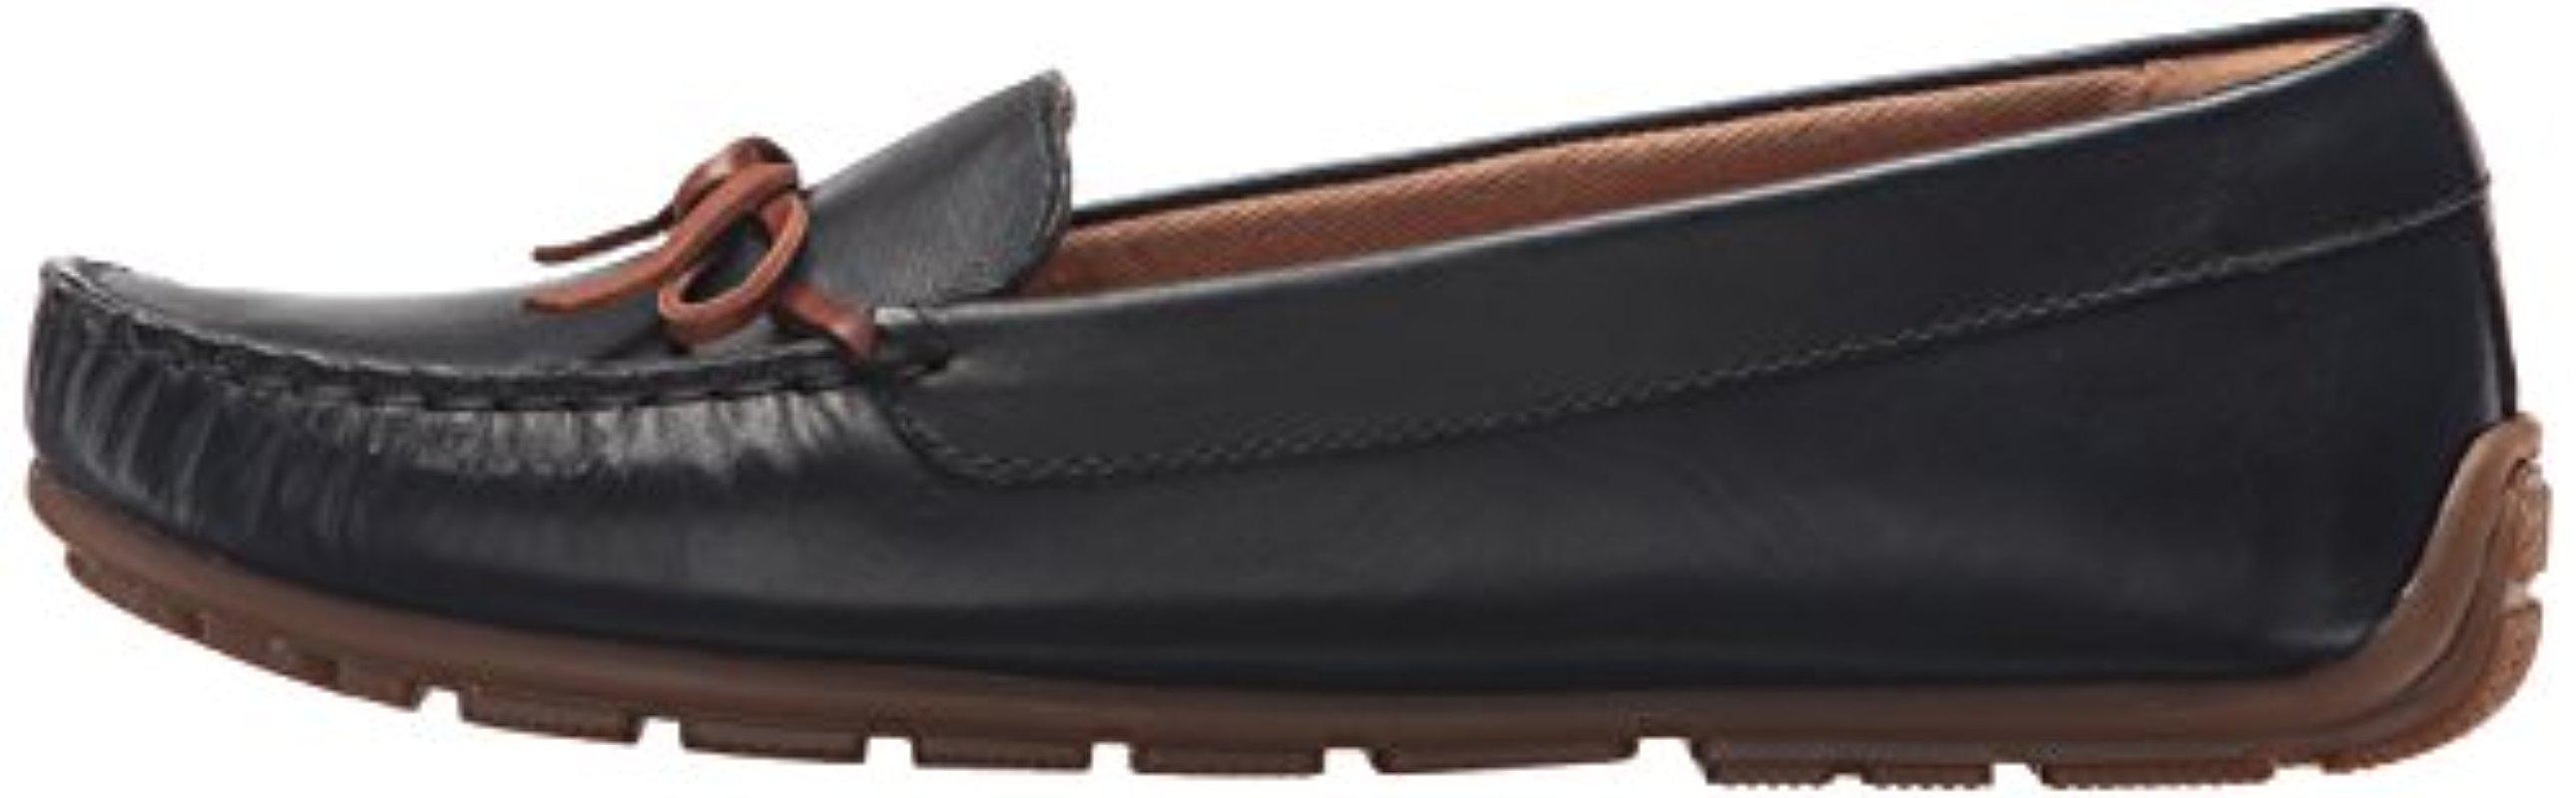 clarks women's dameo swing driving style loafer